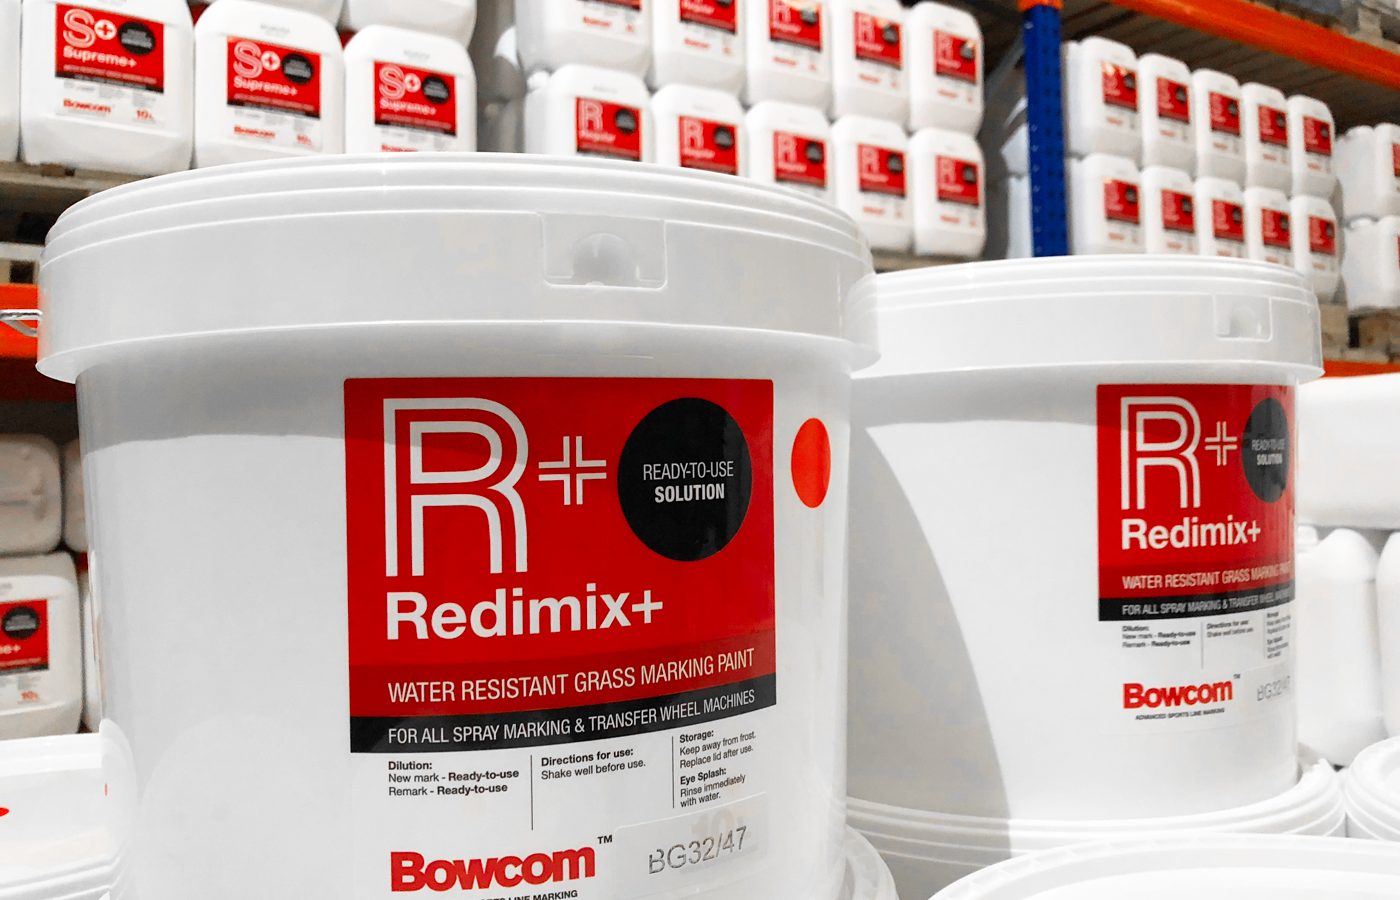 Bowcom packaging design on multiple white tubs in a warehouse by celf creative